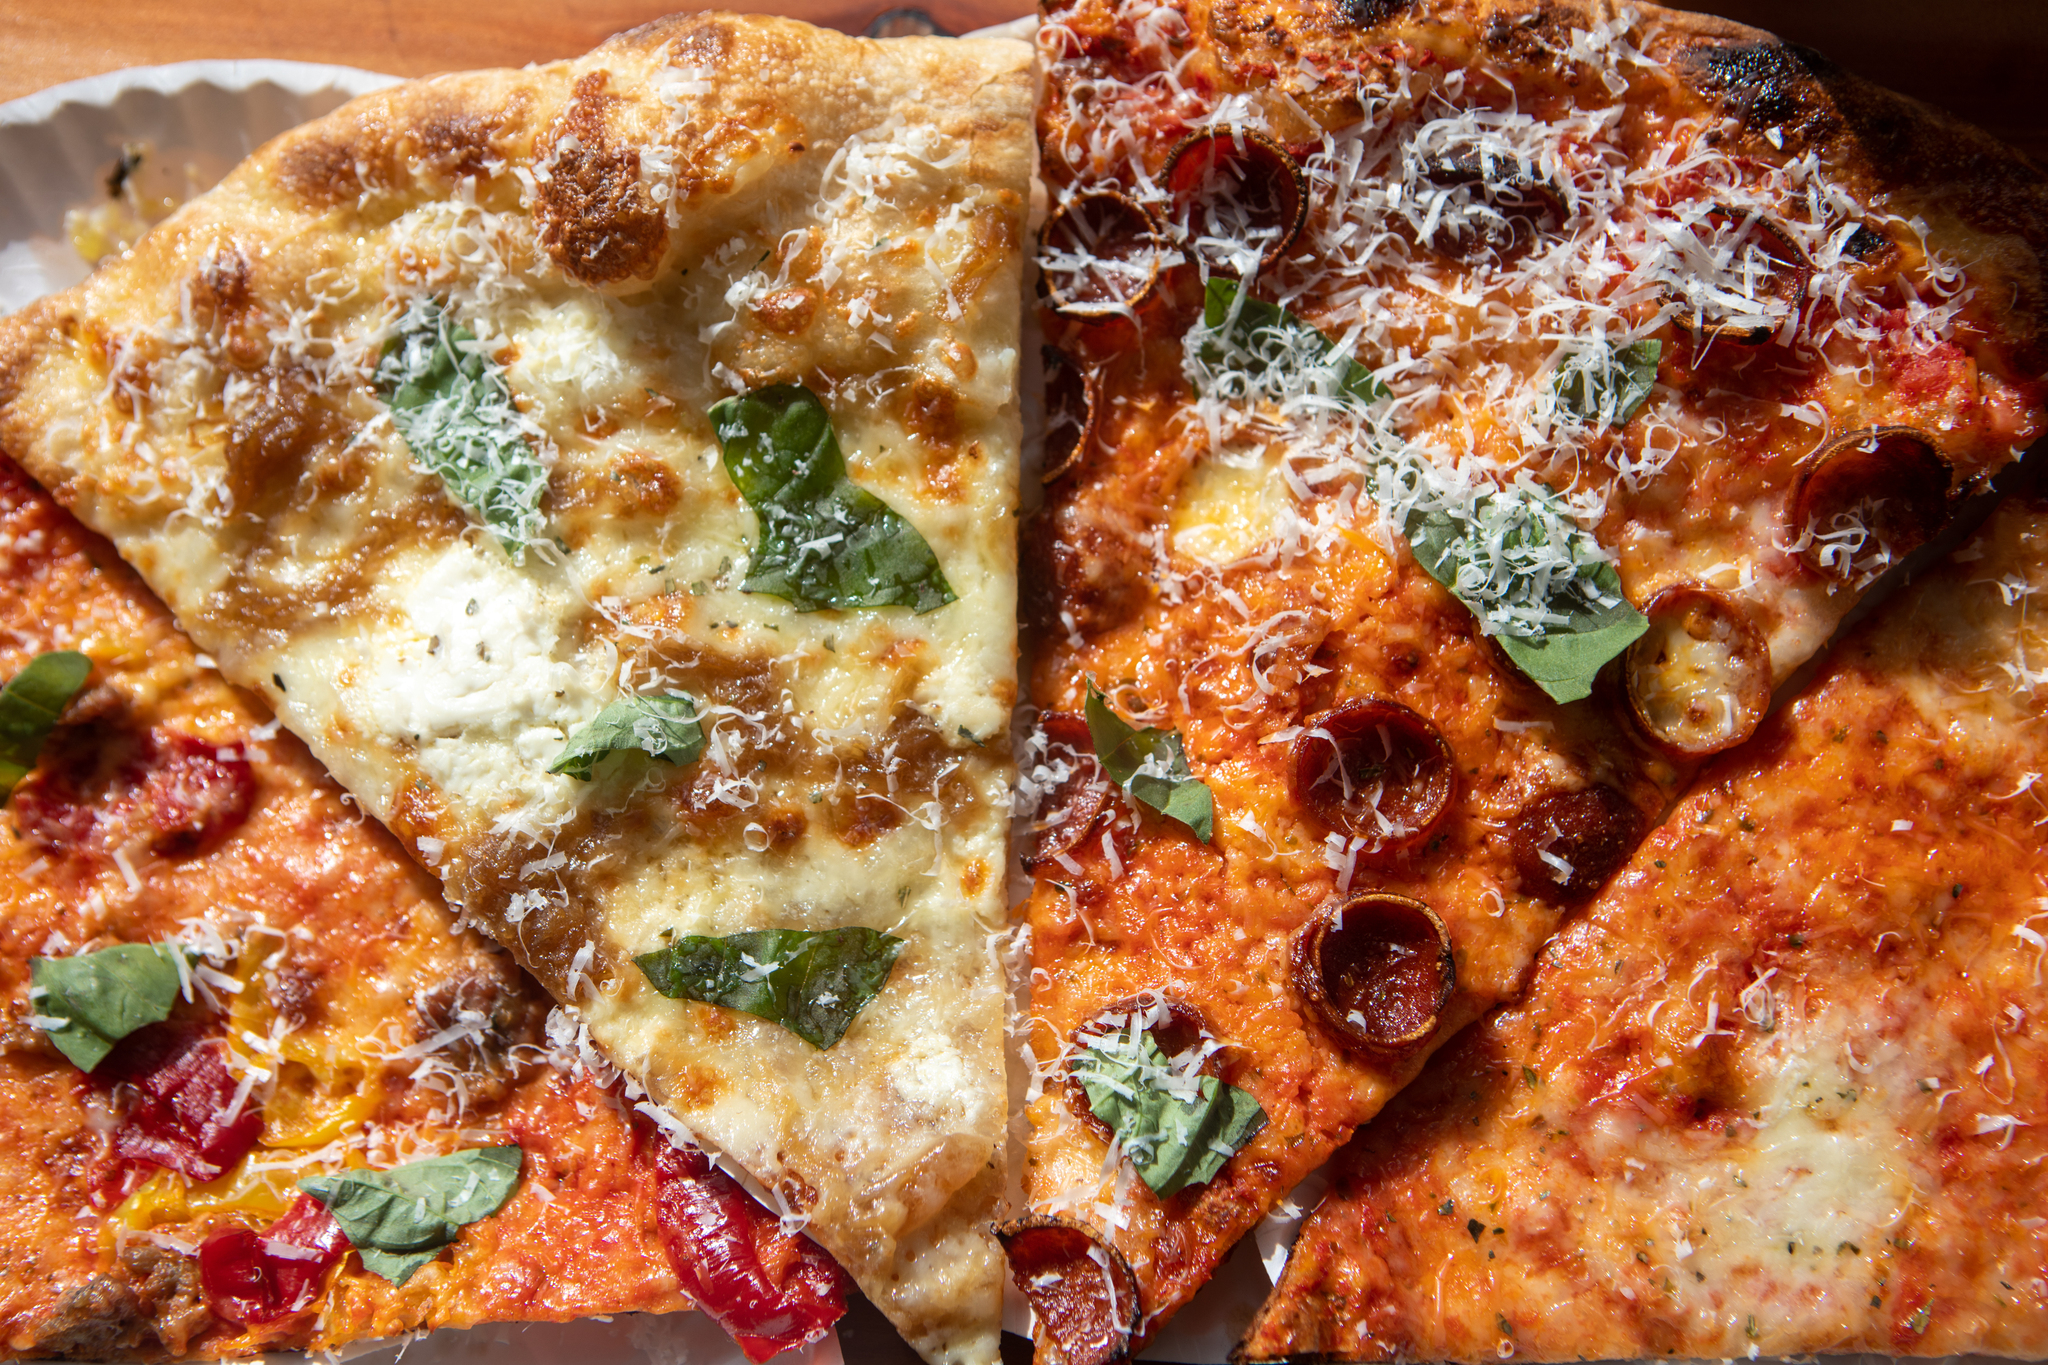 San Francisco’s Outta Sight Pizza offers real New York-style pizza